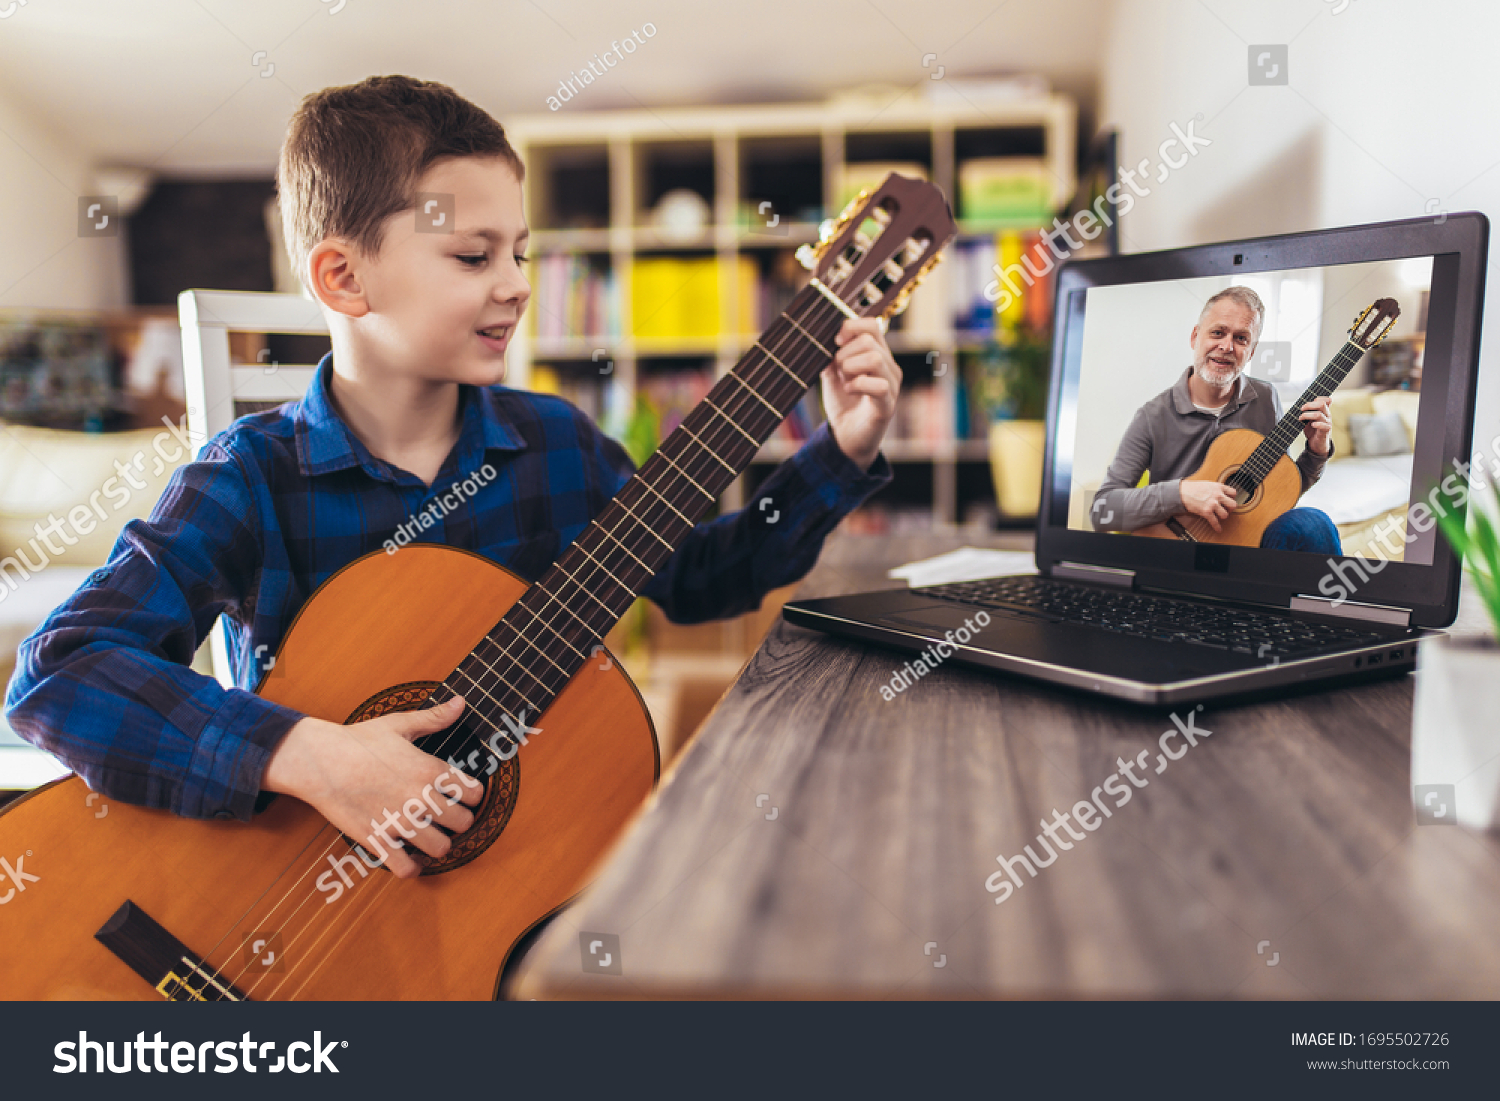 Focused boy playing acoustic guitar and watching online course on laptop while practicing at home. Online training, online classes. #1695502726